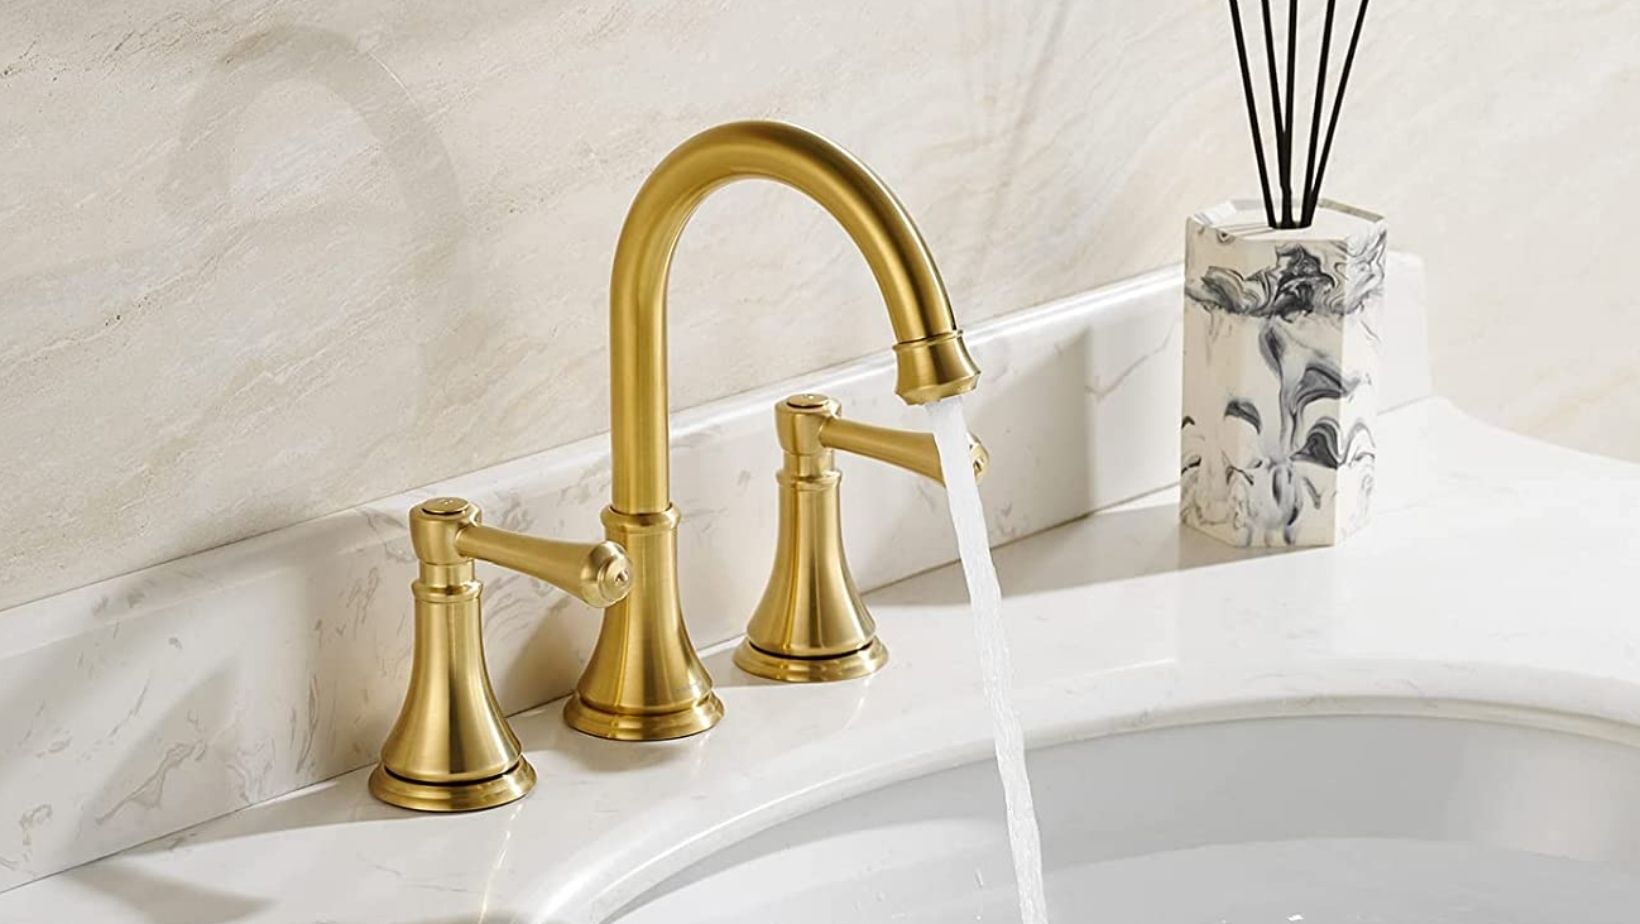 Are Gold Bathroom Faucets In Style?